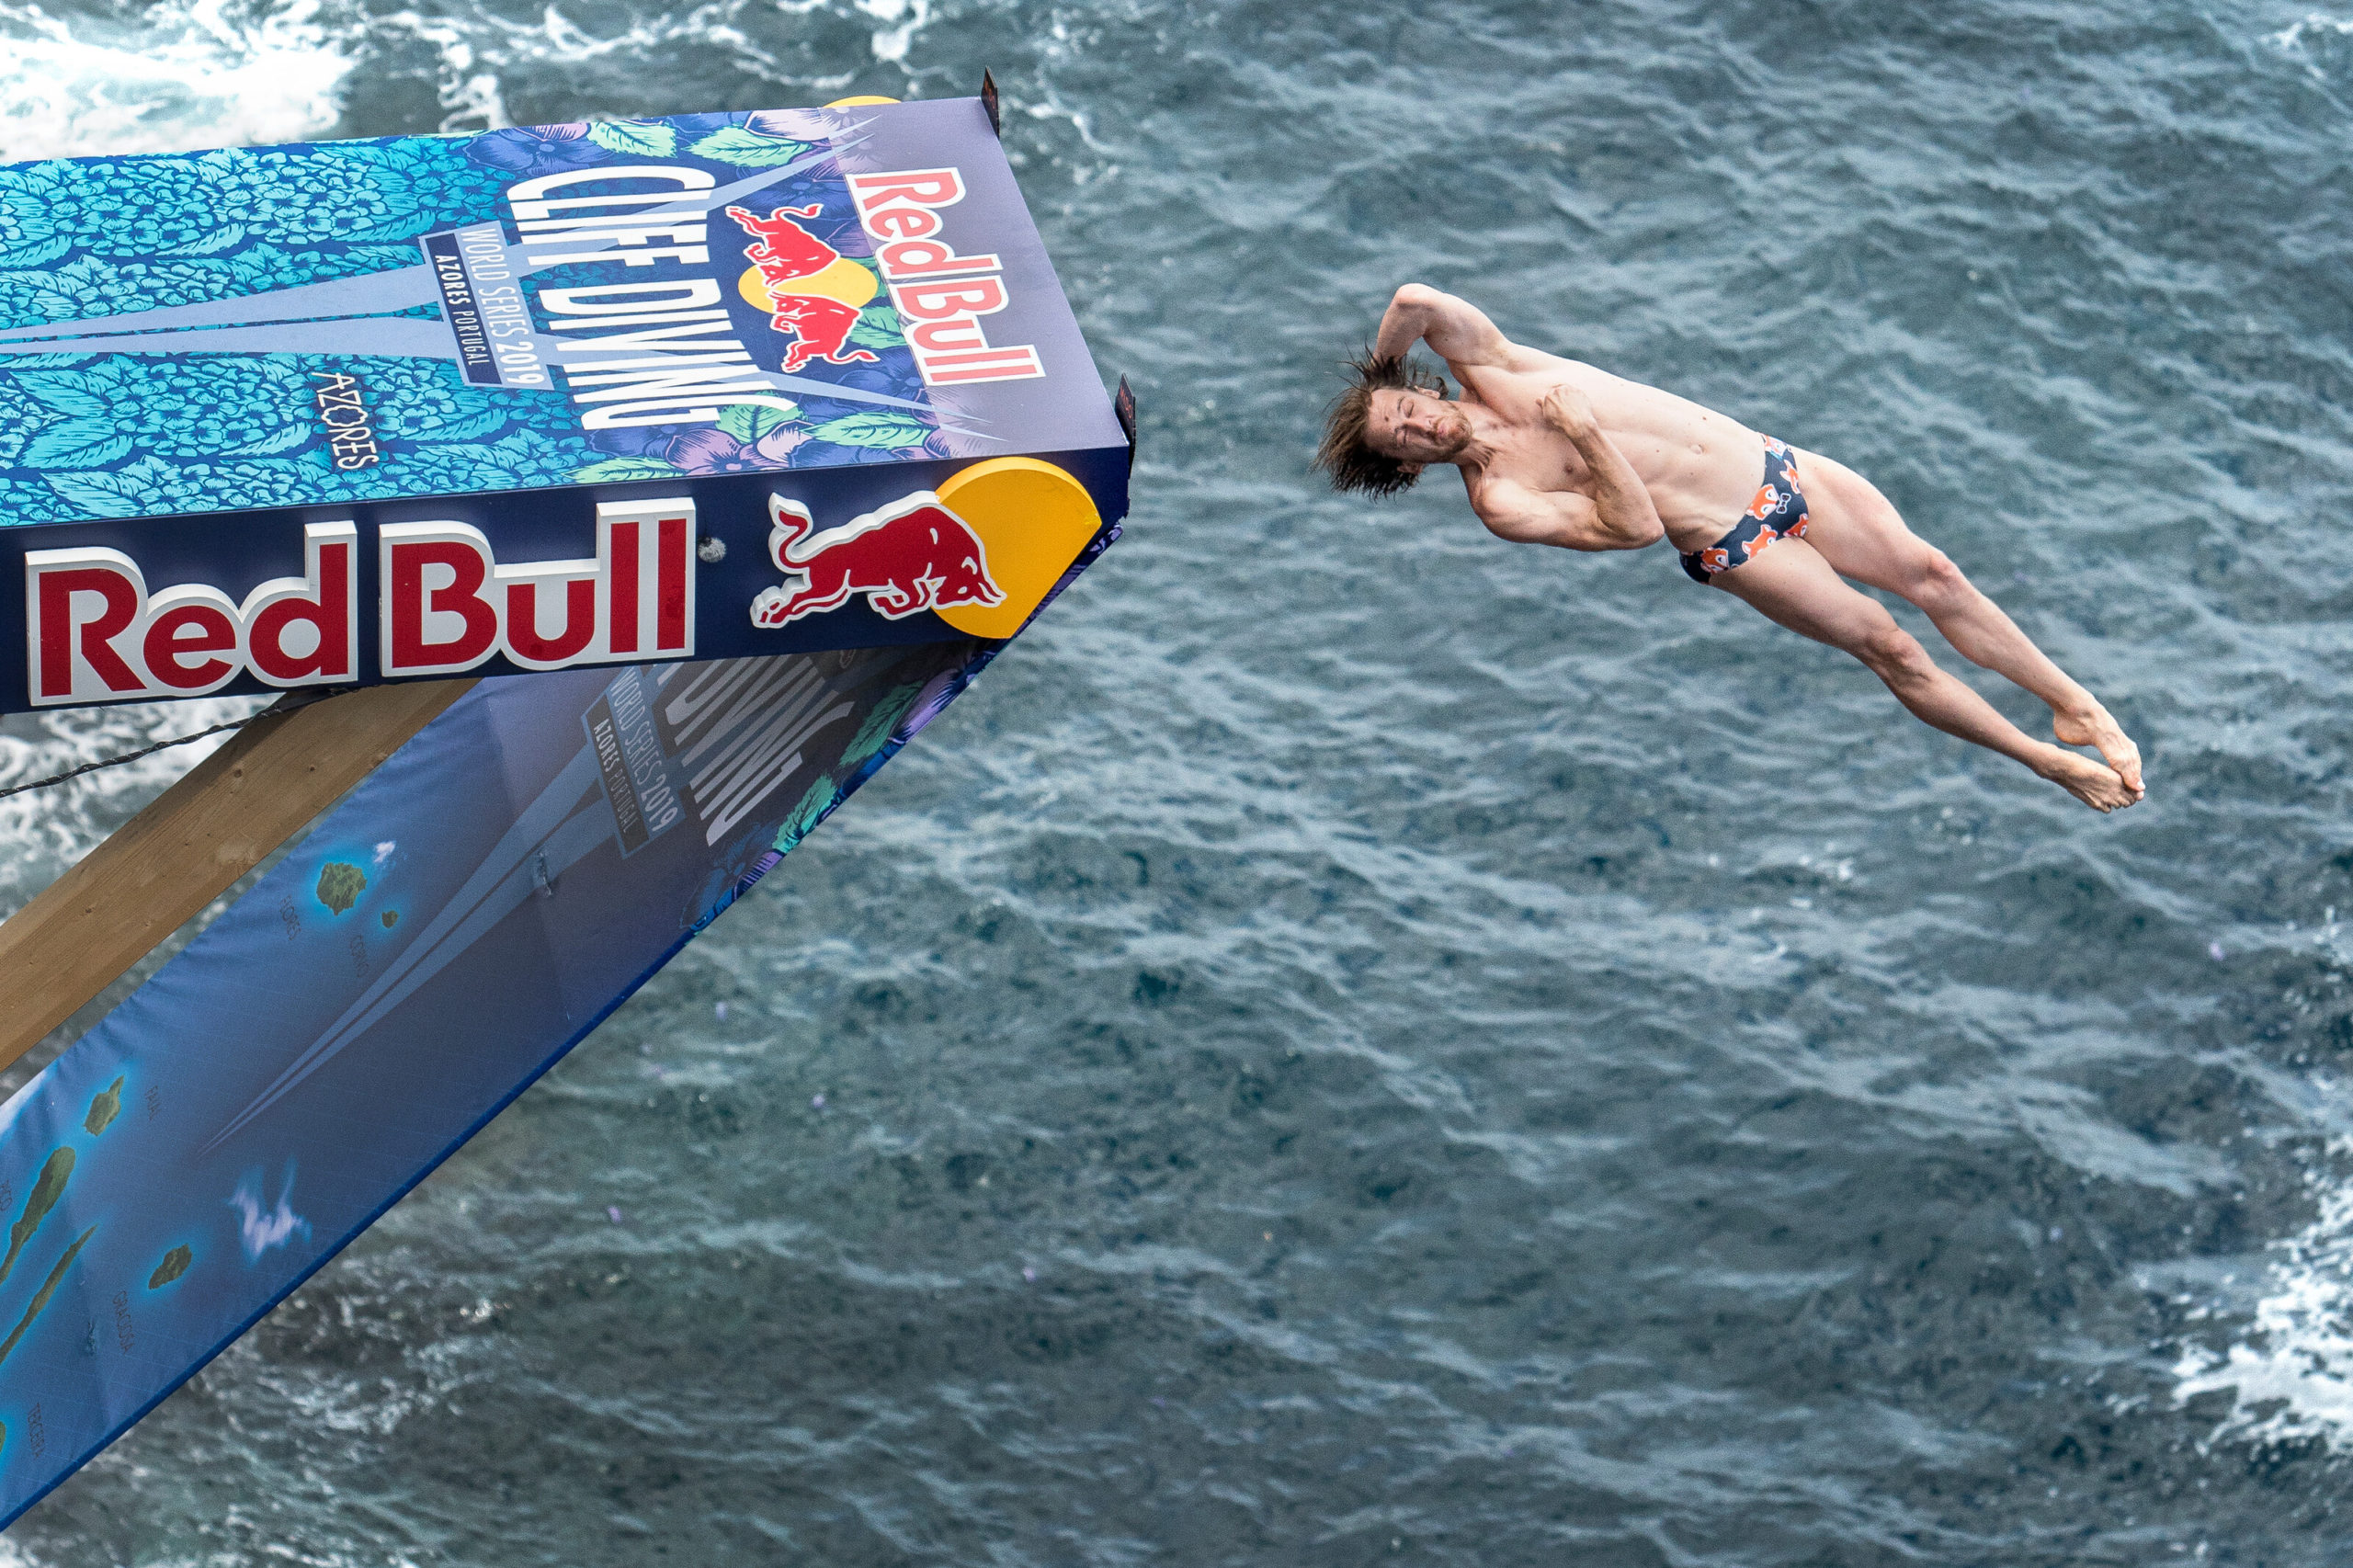 Profet Snavs fire RED BULL CLIFF DIVING WORLD SERIES 2020: AZORES ARE THE BIGGEST CLASSIC OF  THE CALENDAR -